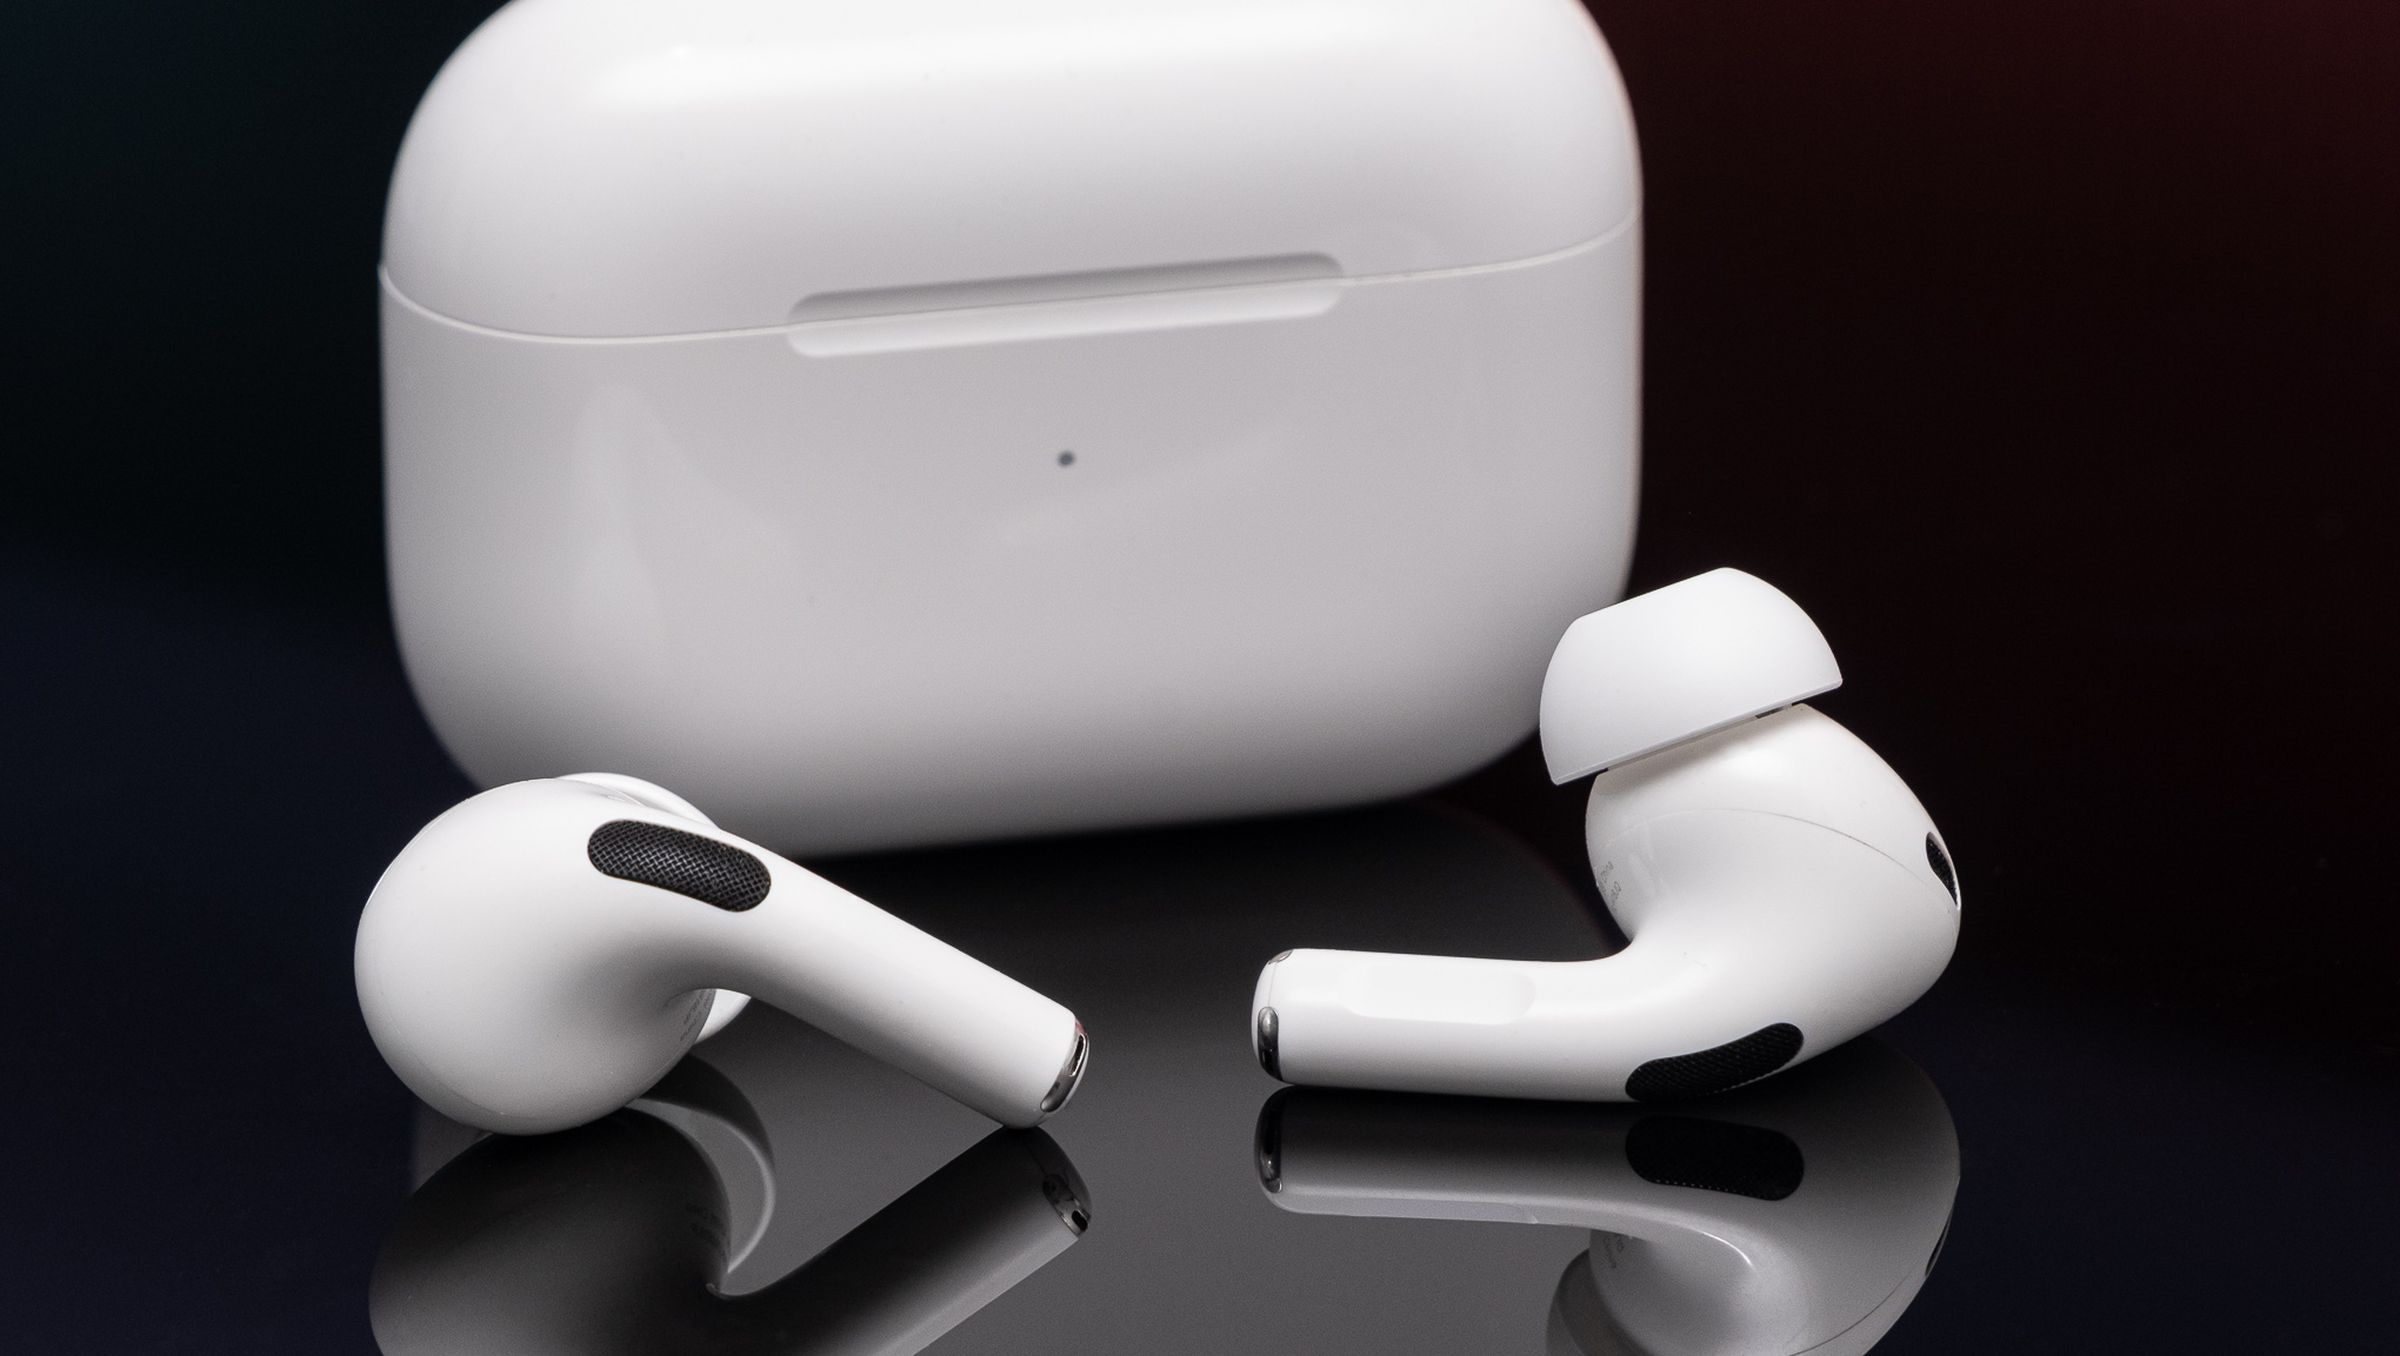 Apple’s second-generation AirPods Pro photographed on a reflective black surface.